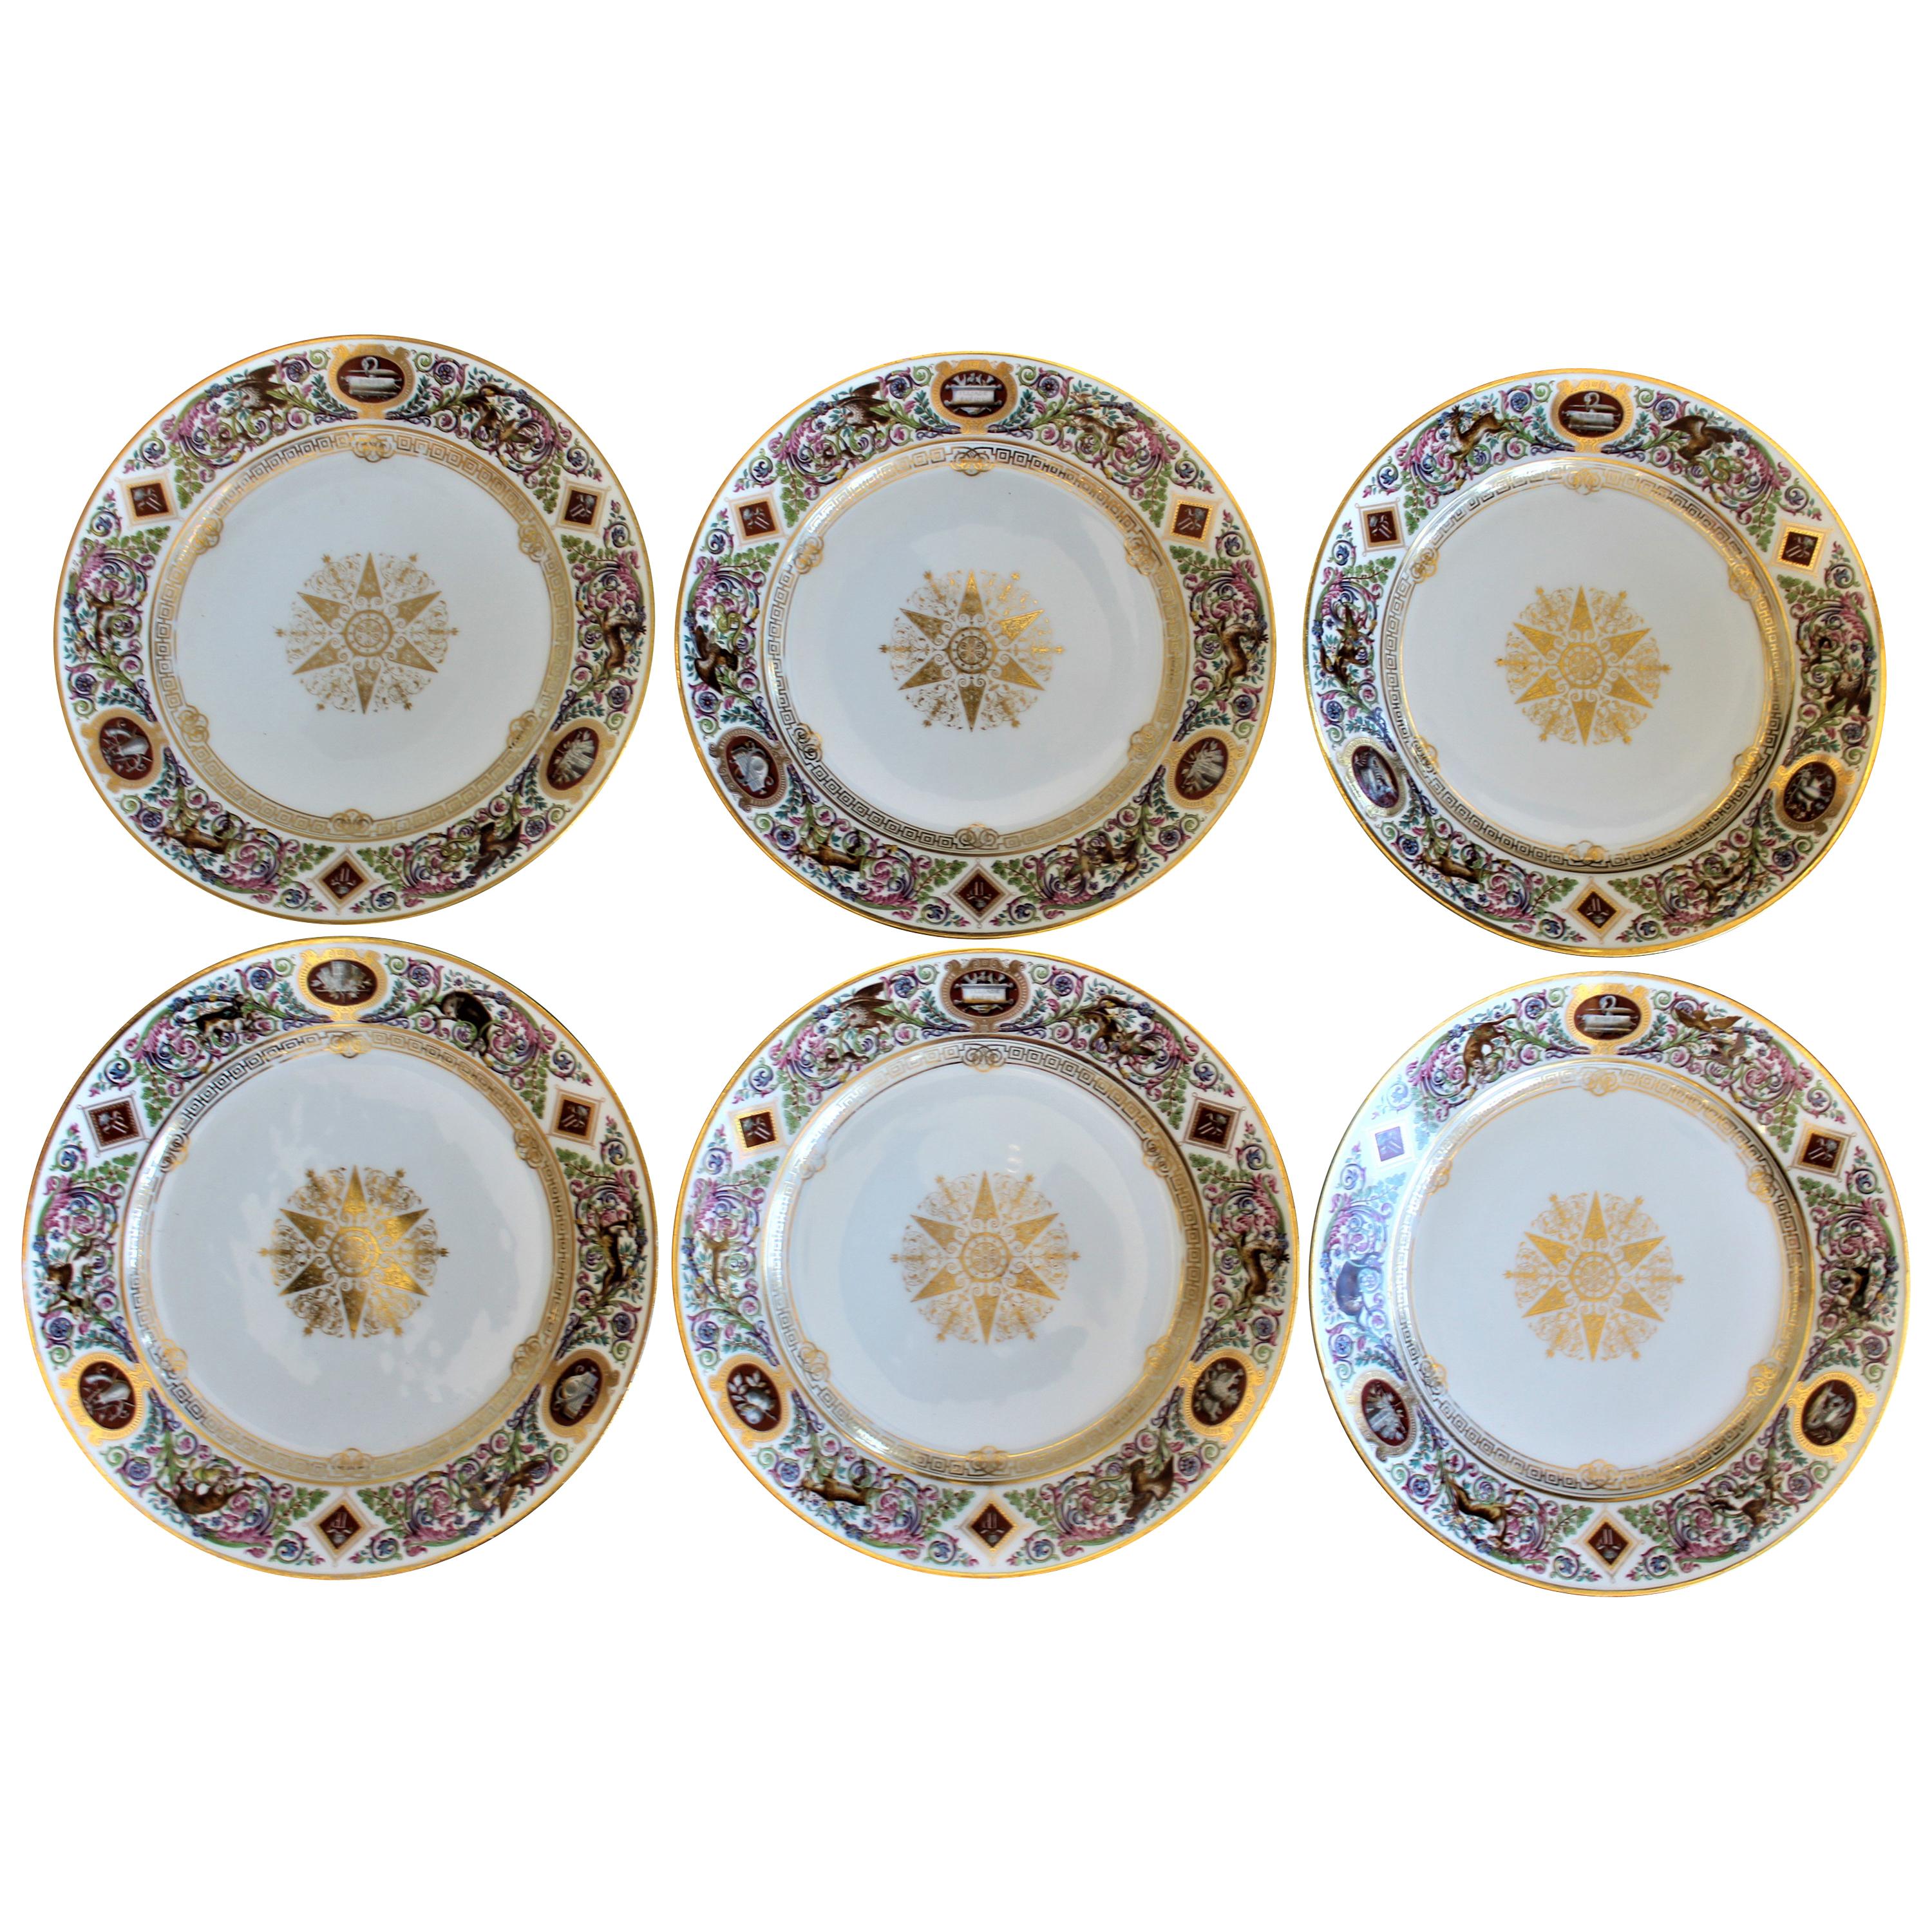  Sevres Chateau de Fountainbleu Pattern French Dinner or Cabinet Plates: 6